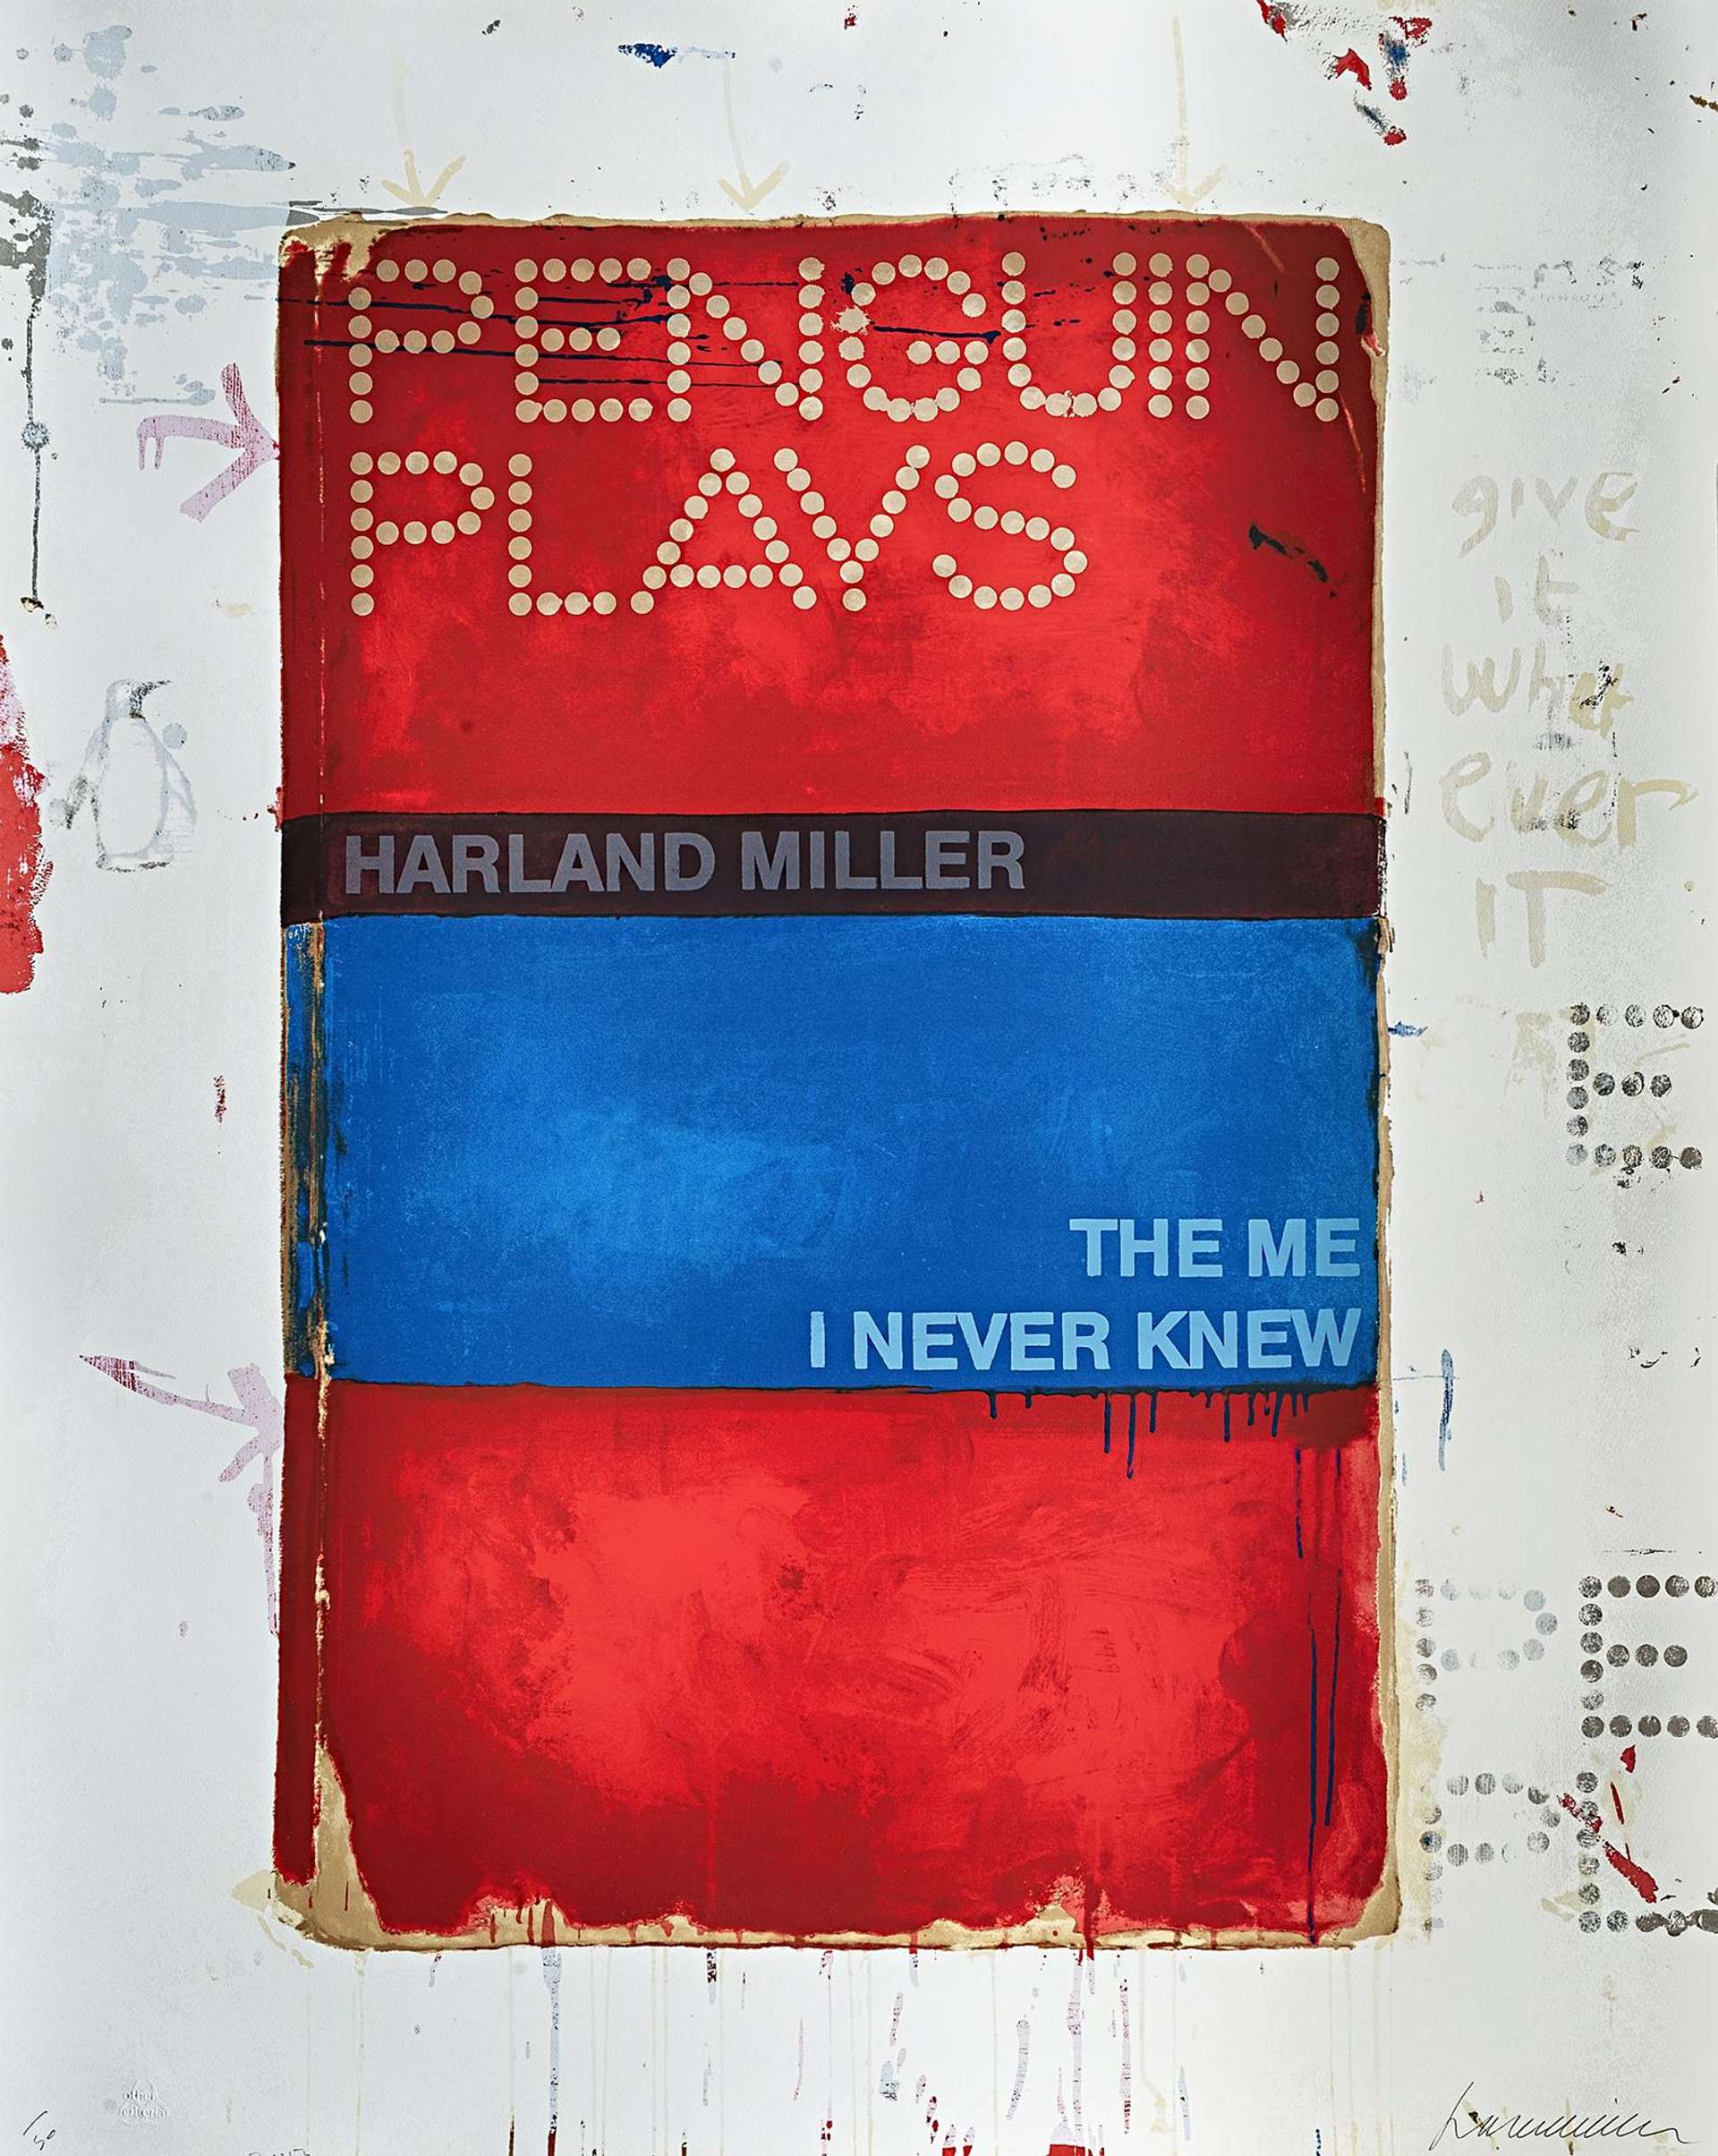 Harland Miller: The Me I Never Knew - Signed Print